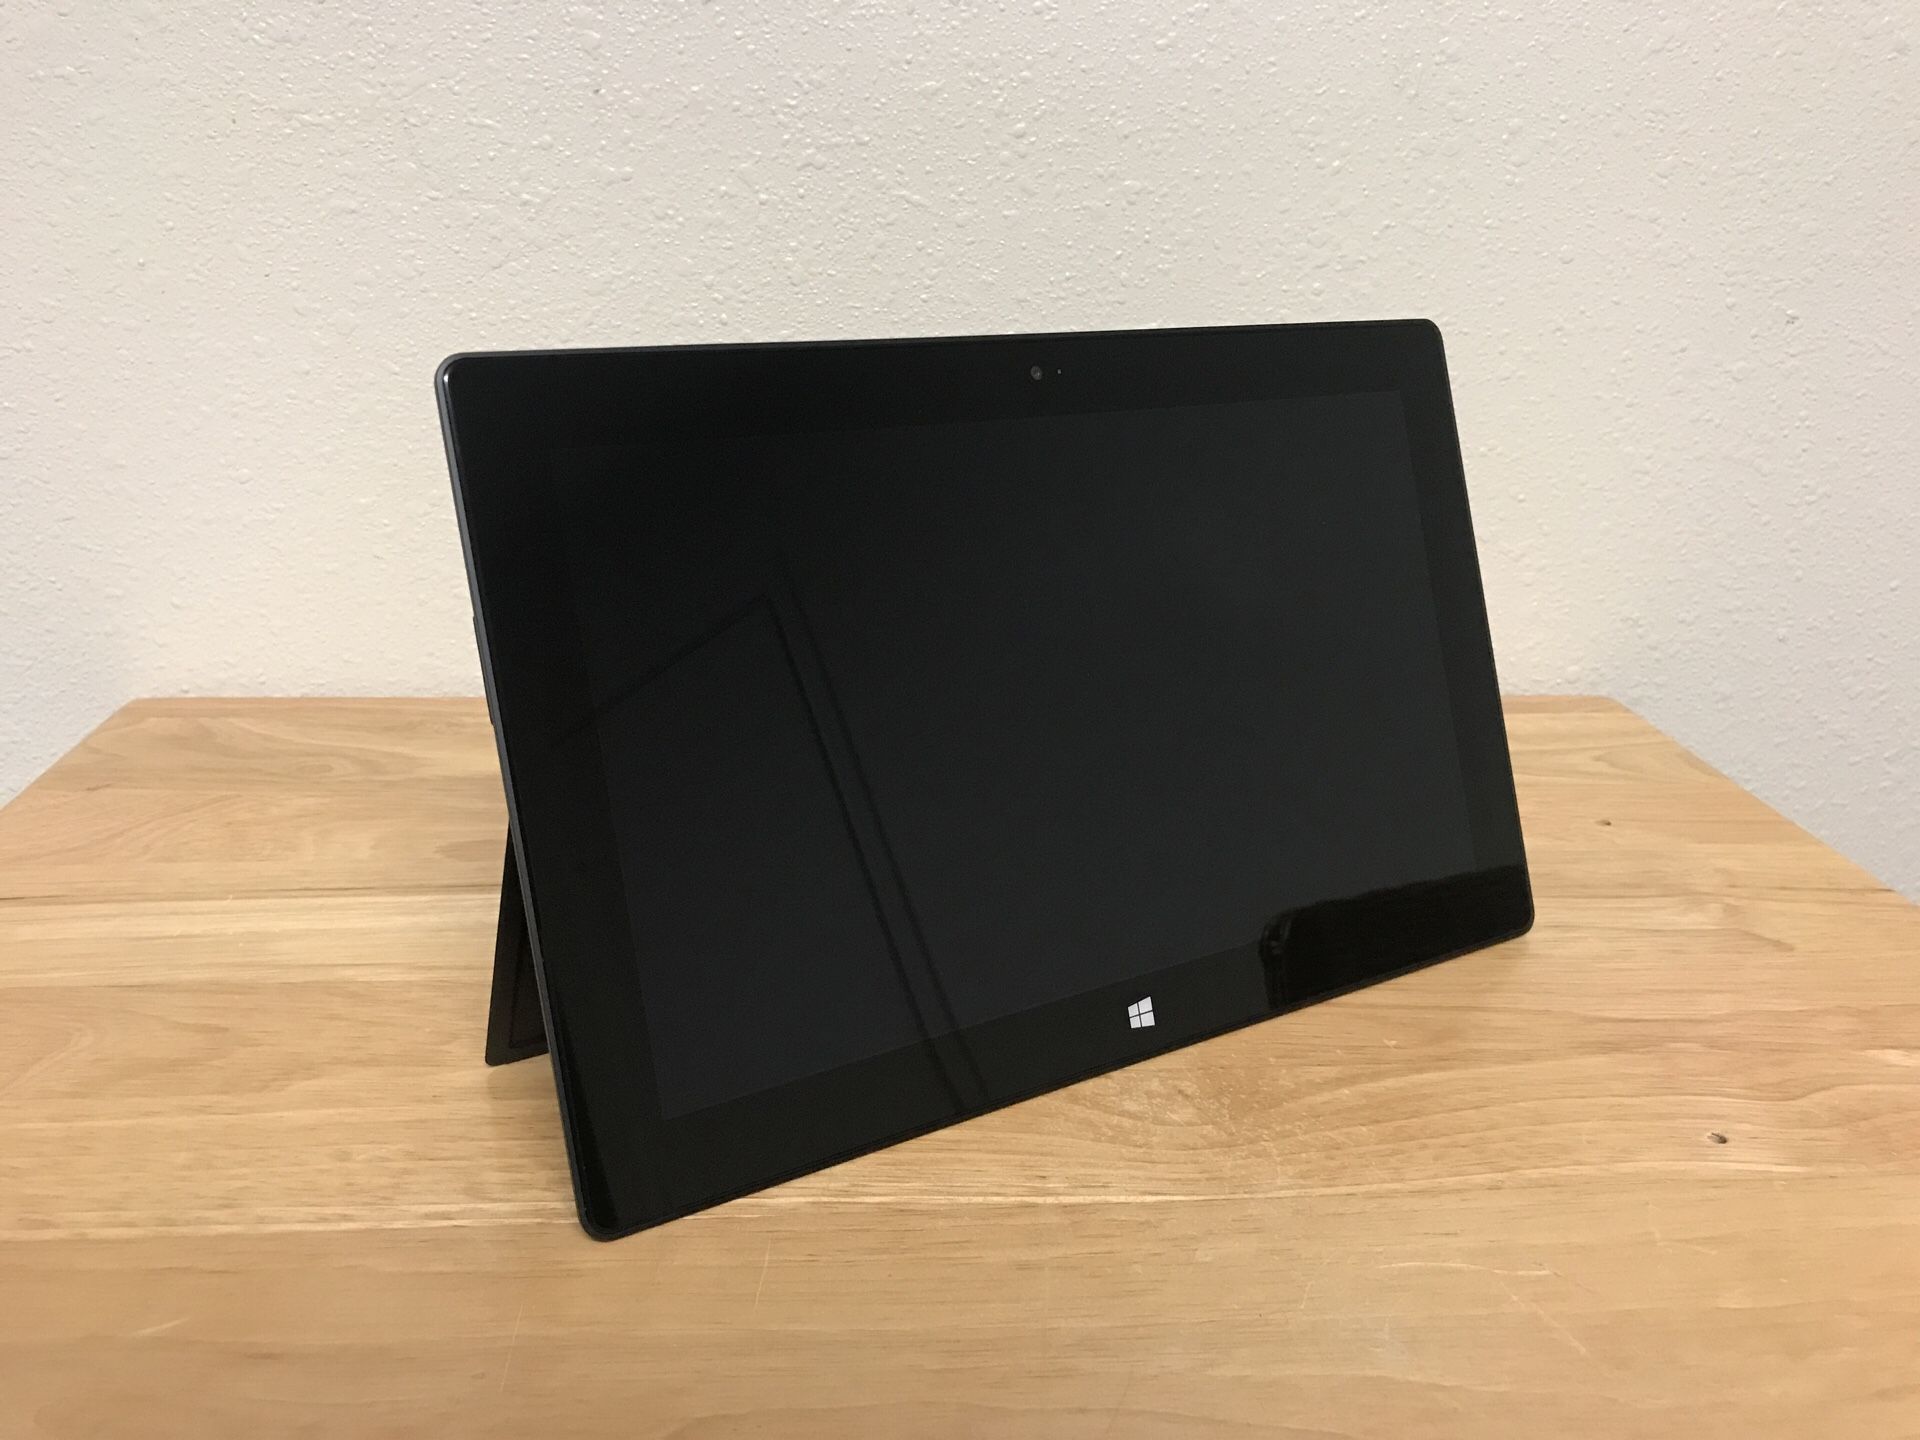 Microsoft Surface RT Tablet